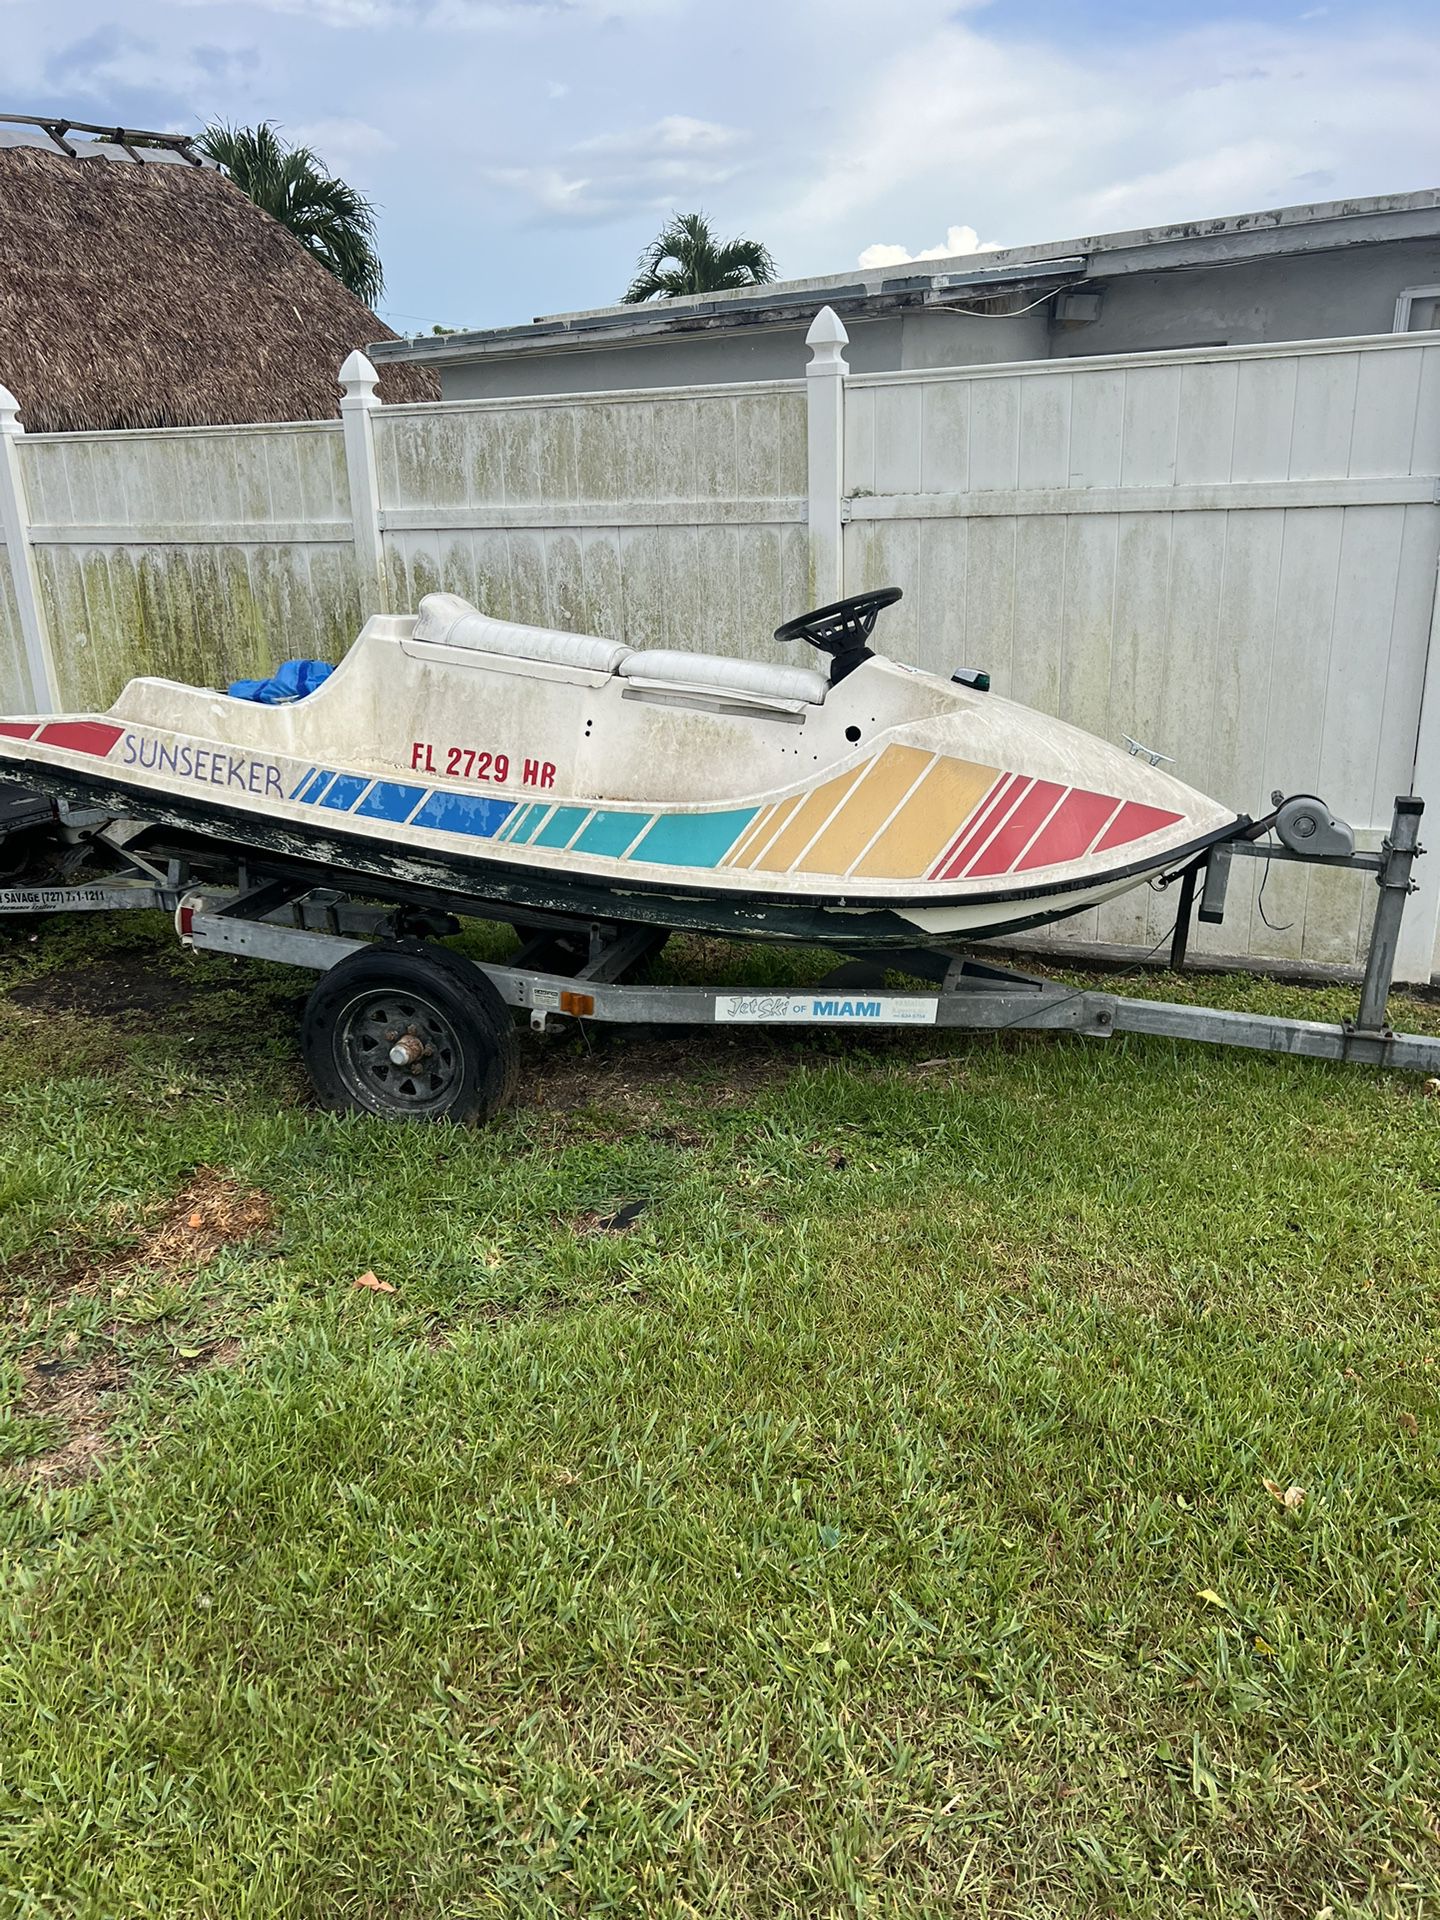 Free Outboard Jet Ski Only No Title No Trailer No Engine